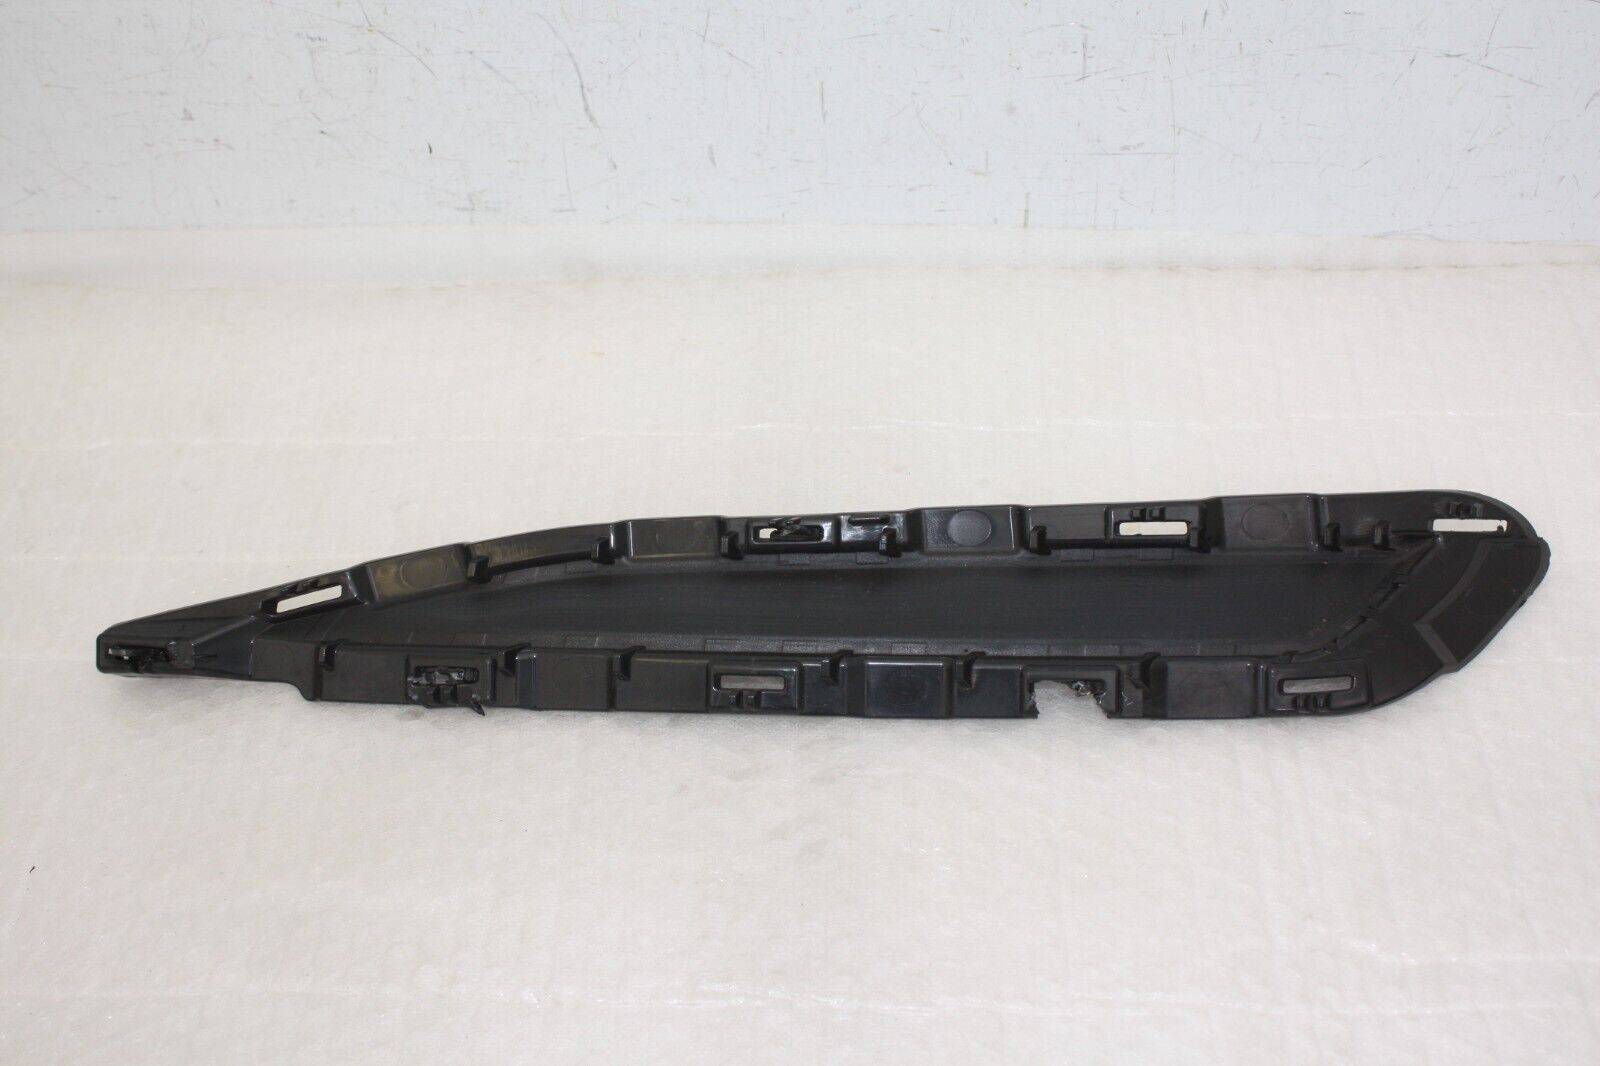 Audi-Q7-Front-Right-End-Cap-Cover-2015-TO-2019-4M0807750A-Genuine-176318342447